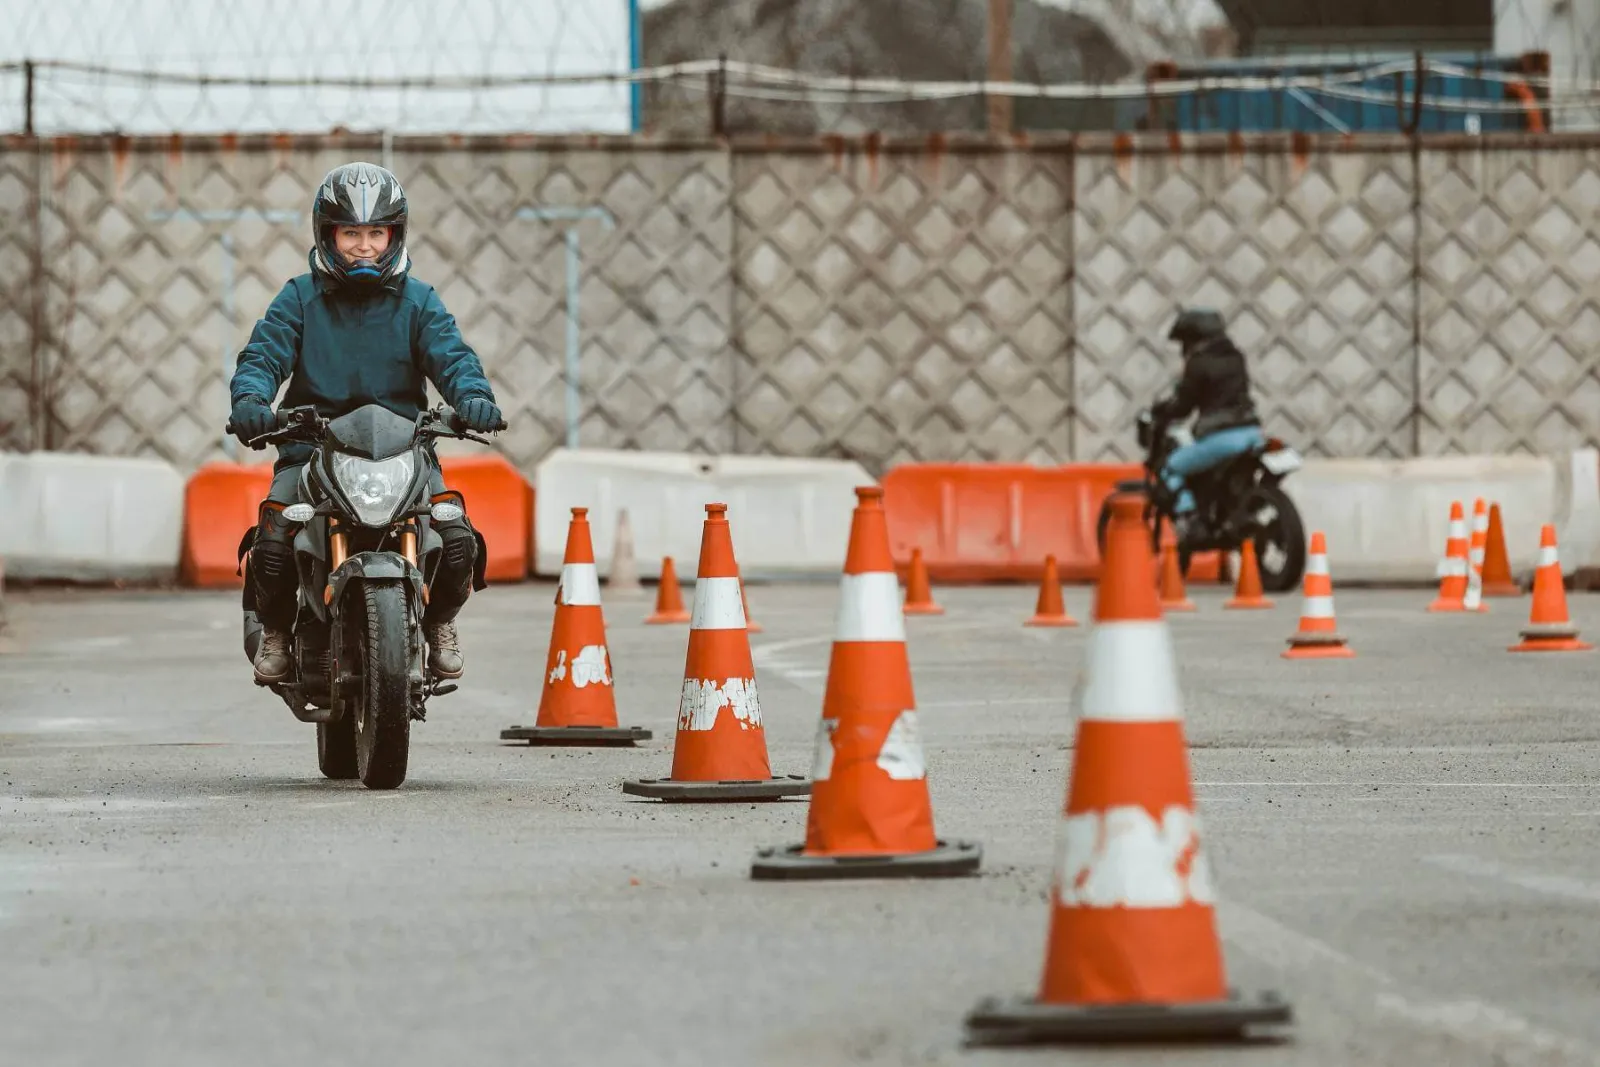 How to Obtain a Motorcycle License in Tennessee 